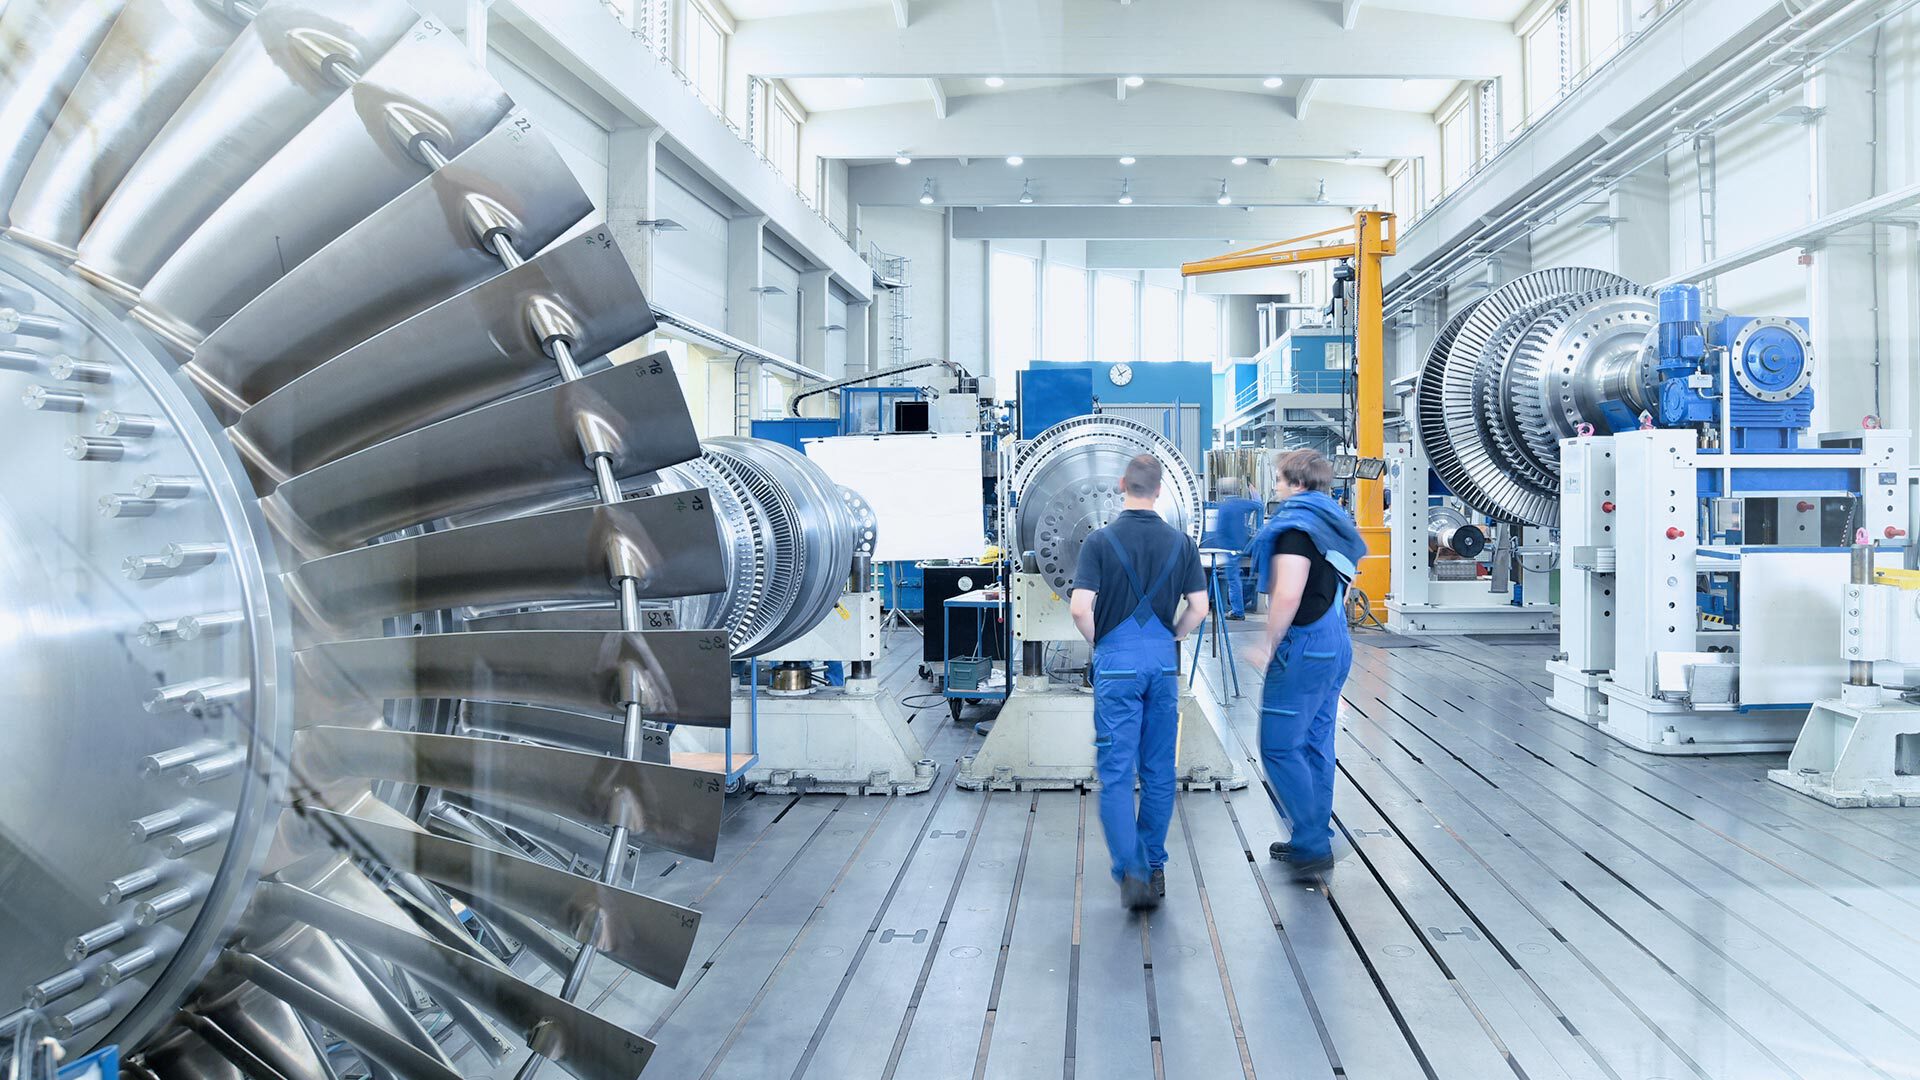 two engineers are walking through an industrial hall with machinery